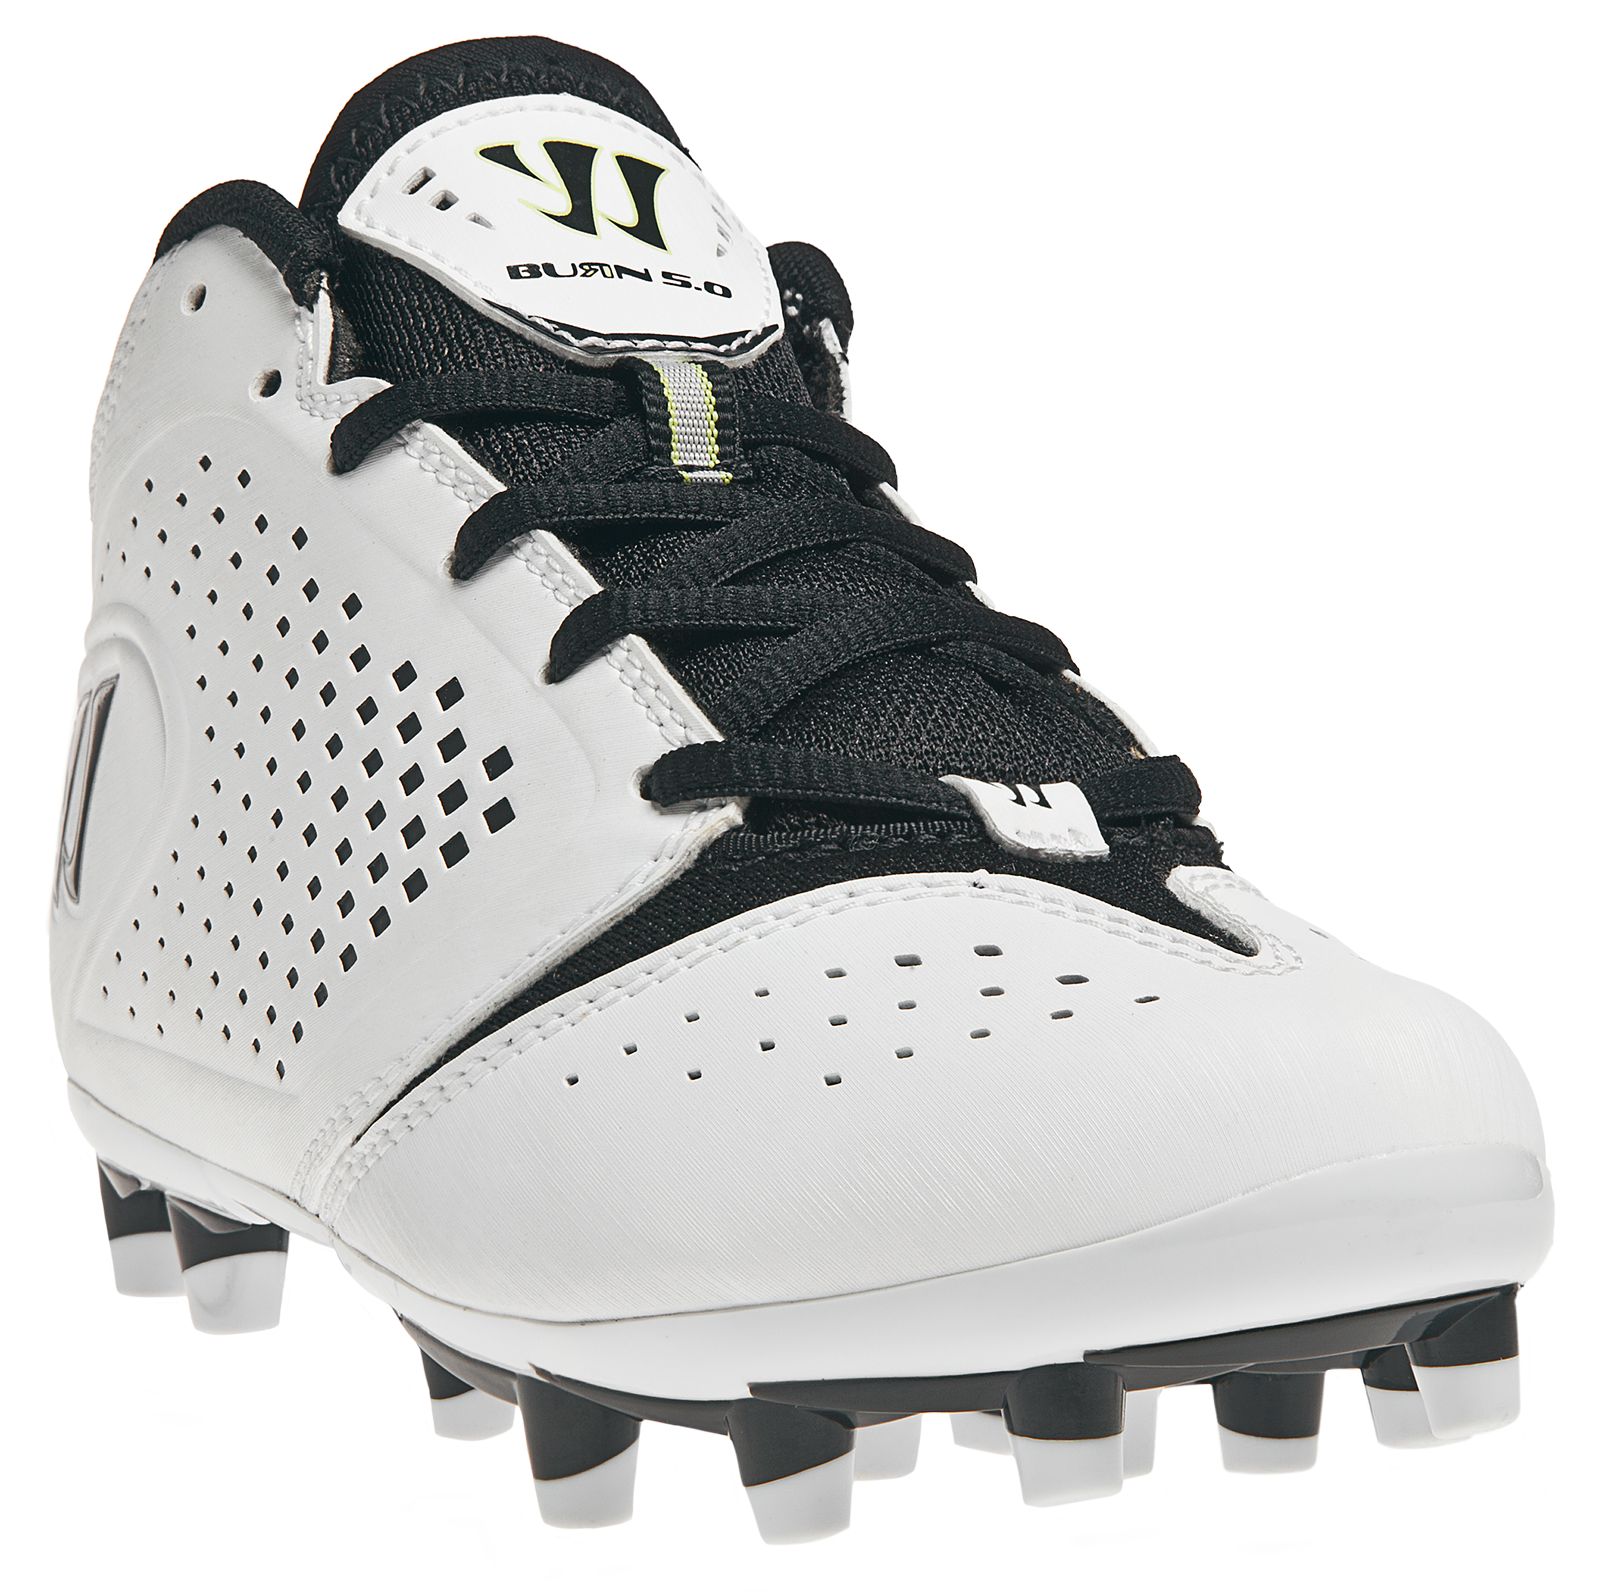 Youth Burn Speed Jr. 5.0 Cleat, White with Black image number 2